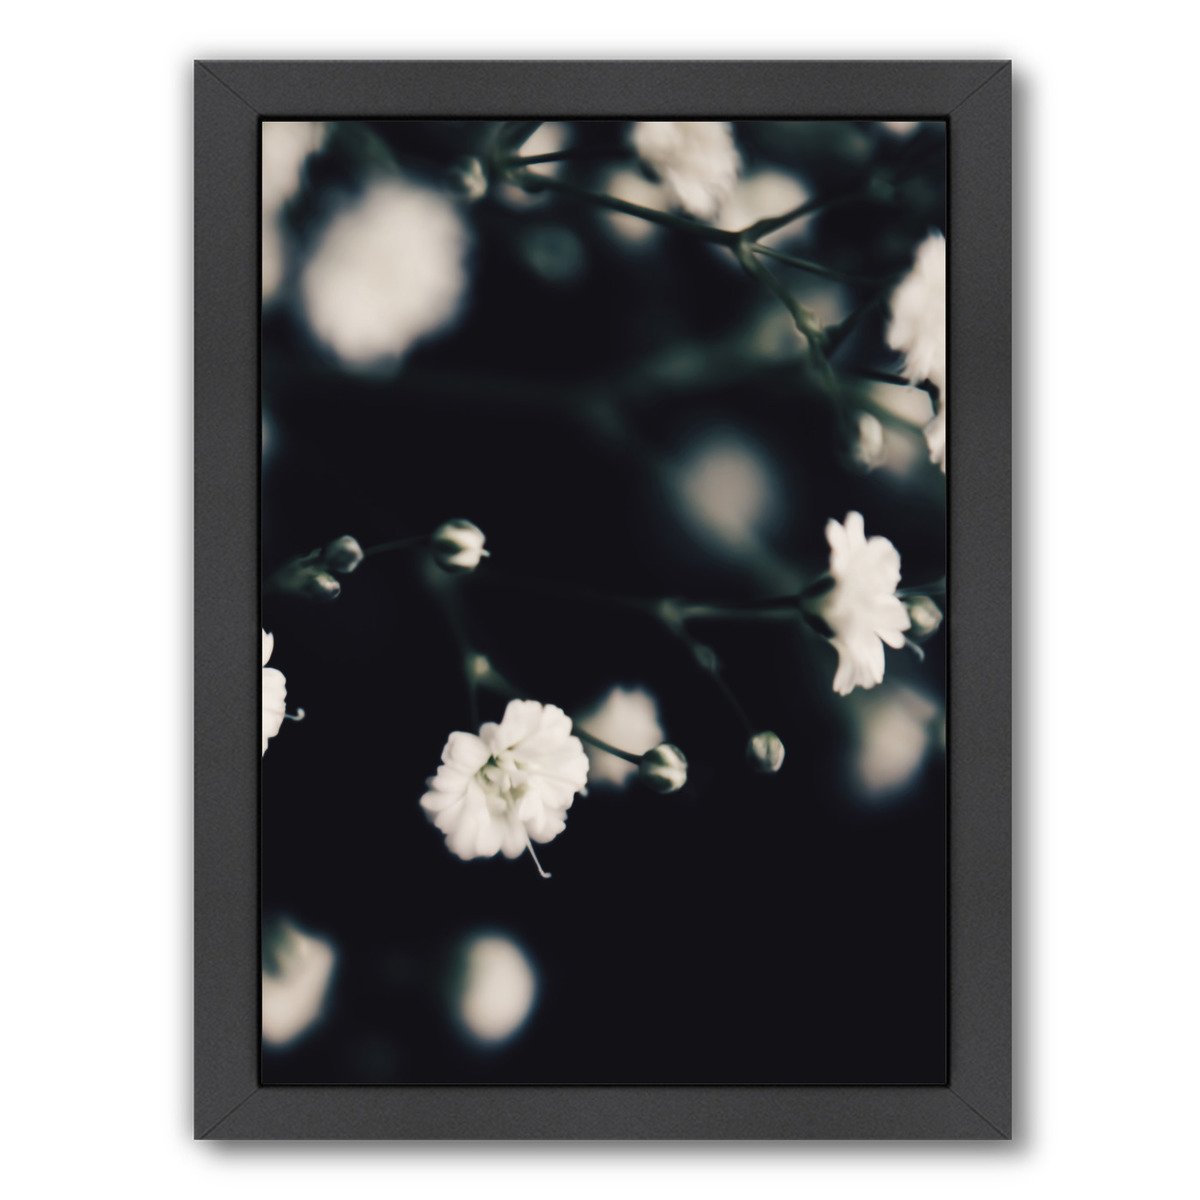 Ayushi by Ingrid Beddoes Framed Print - Americanflat